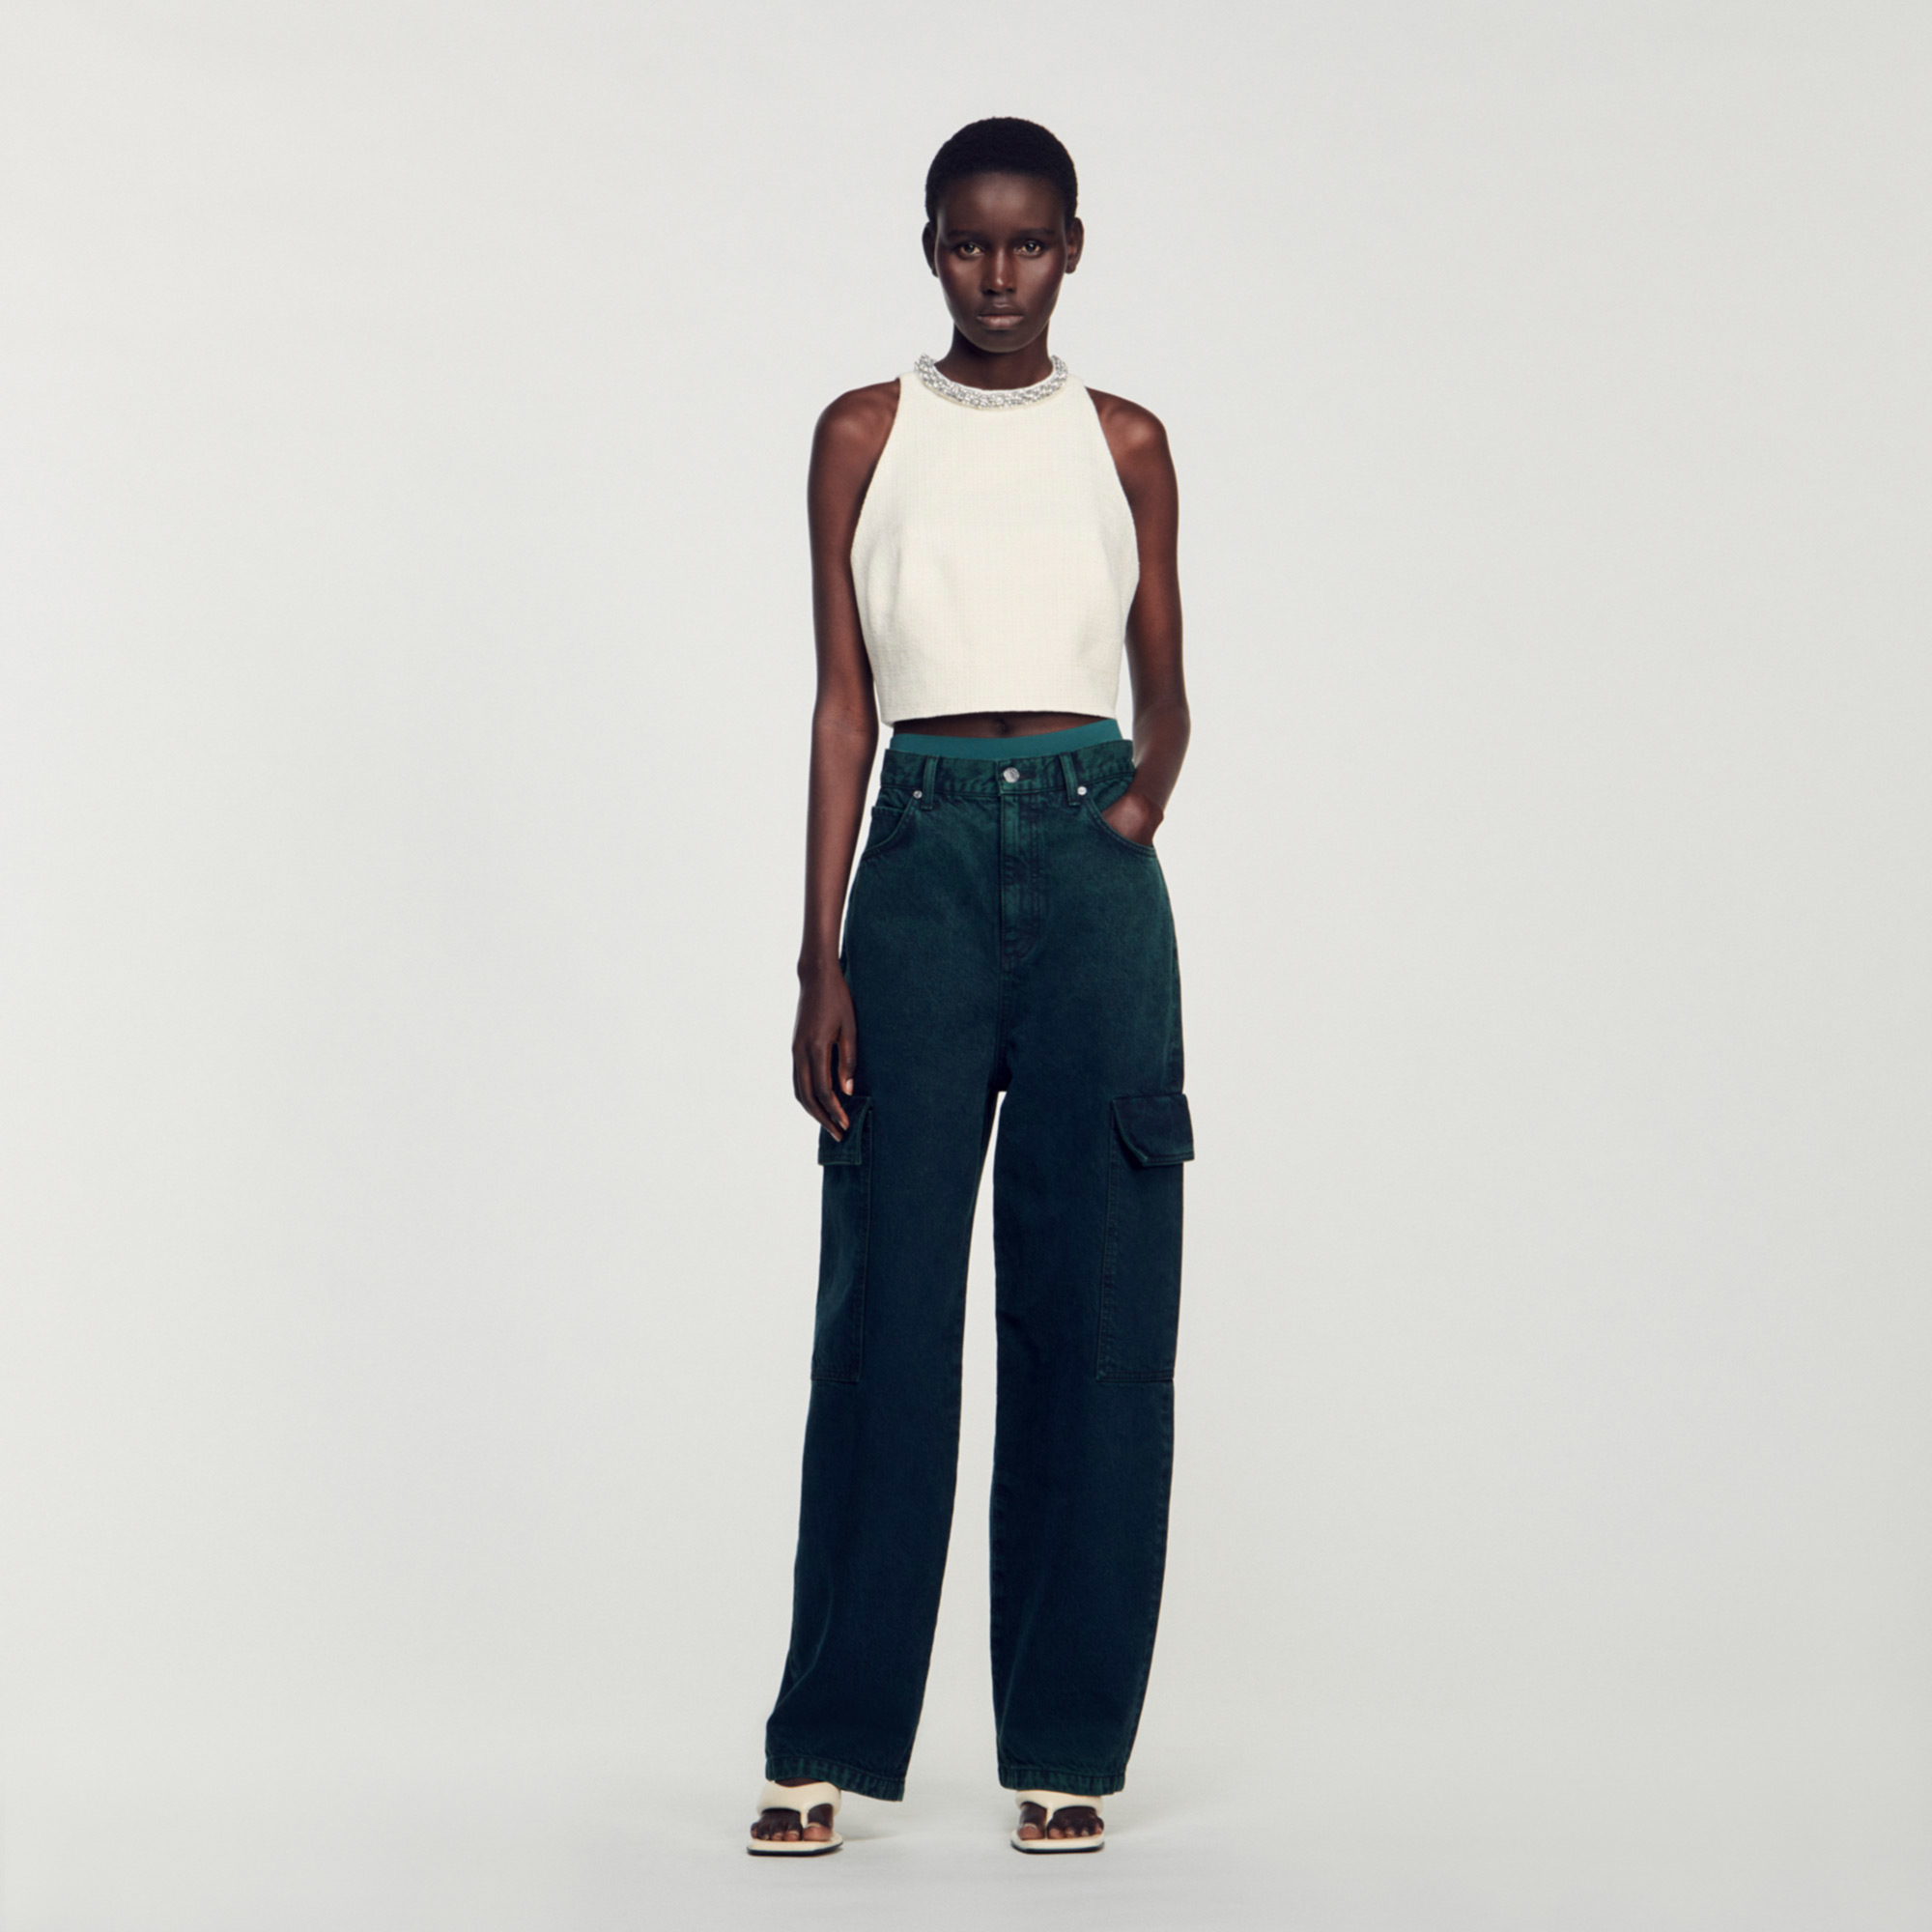 Sandro cotton Tweed cropped top